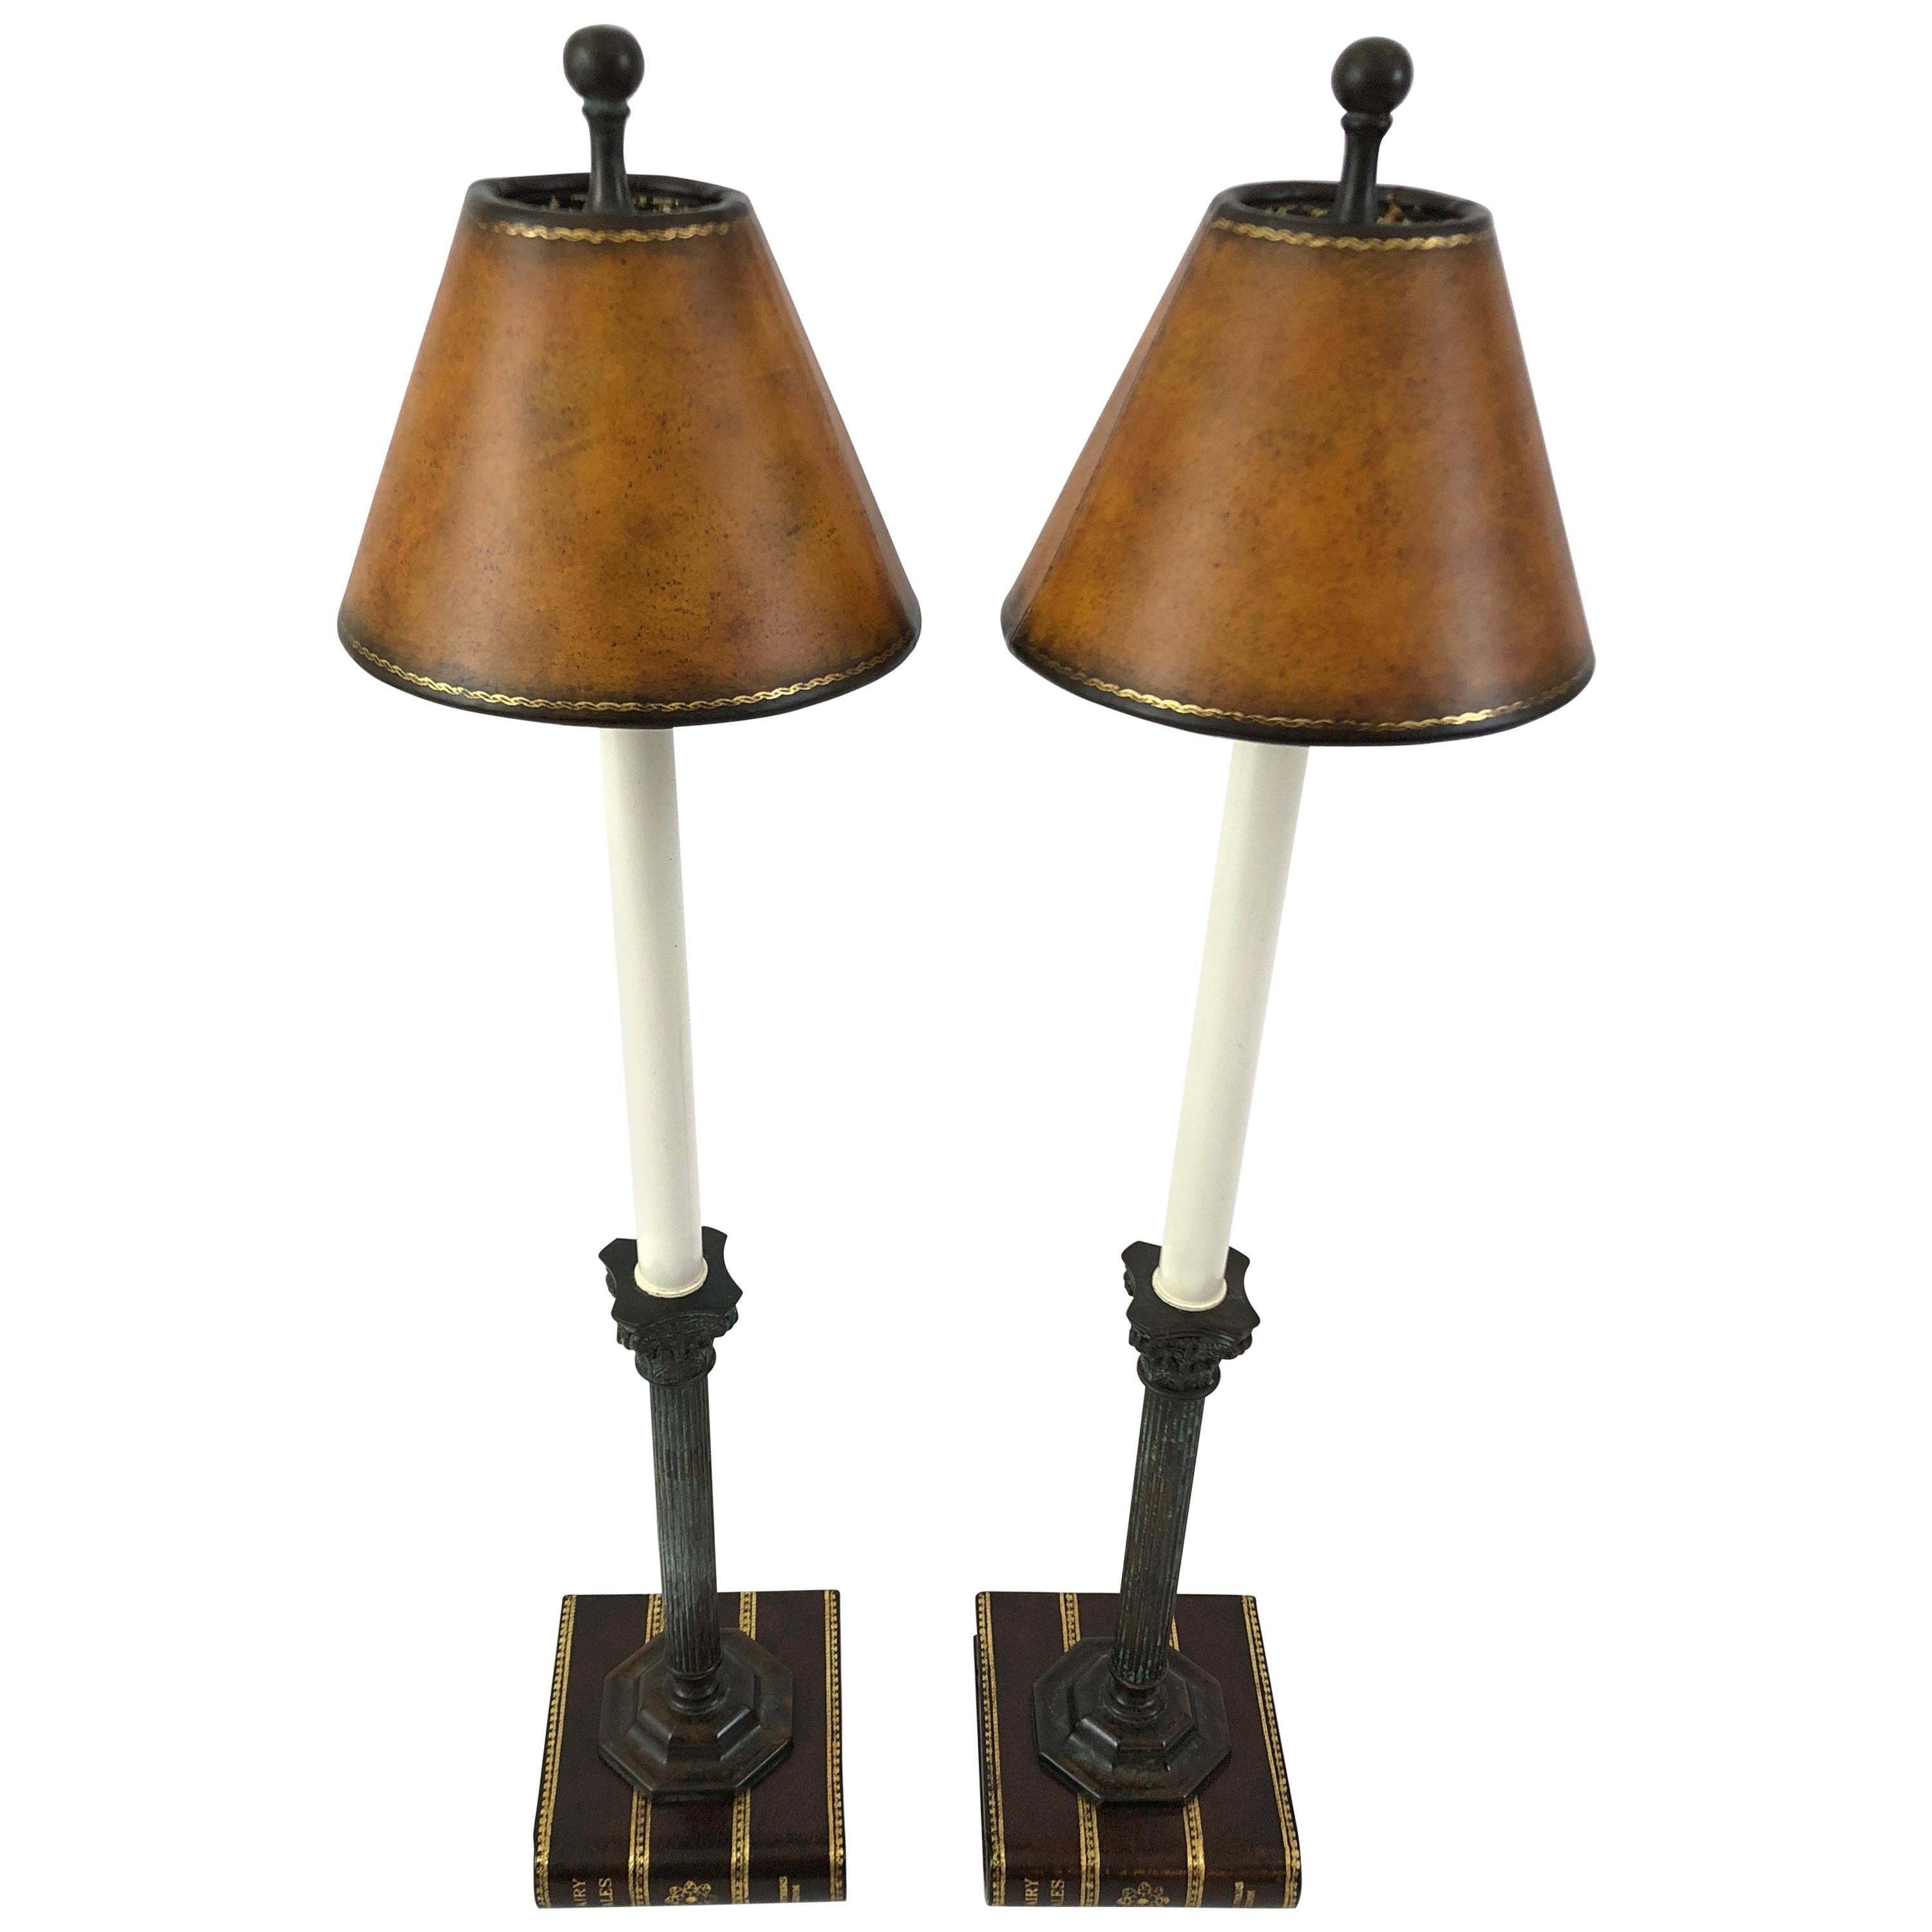 Clever Pair of Maitland-Smith Trompe L'oeil Book and Column Table Lamps